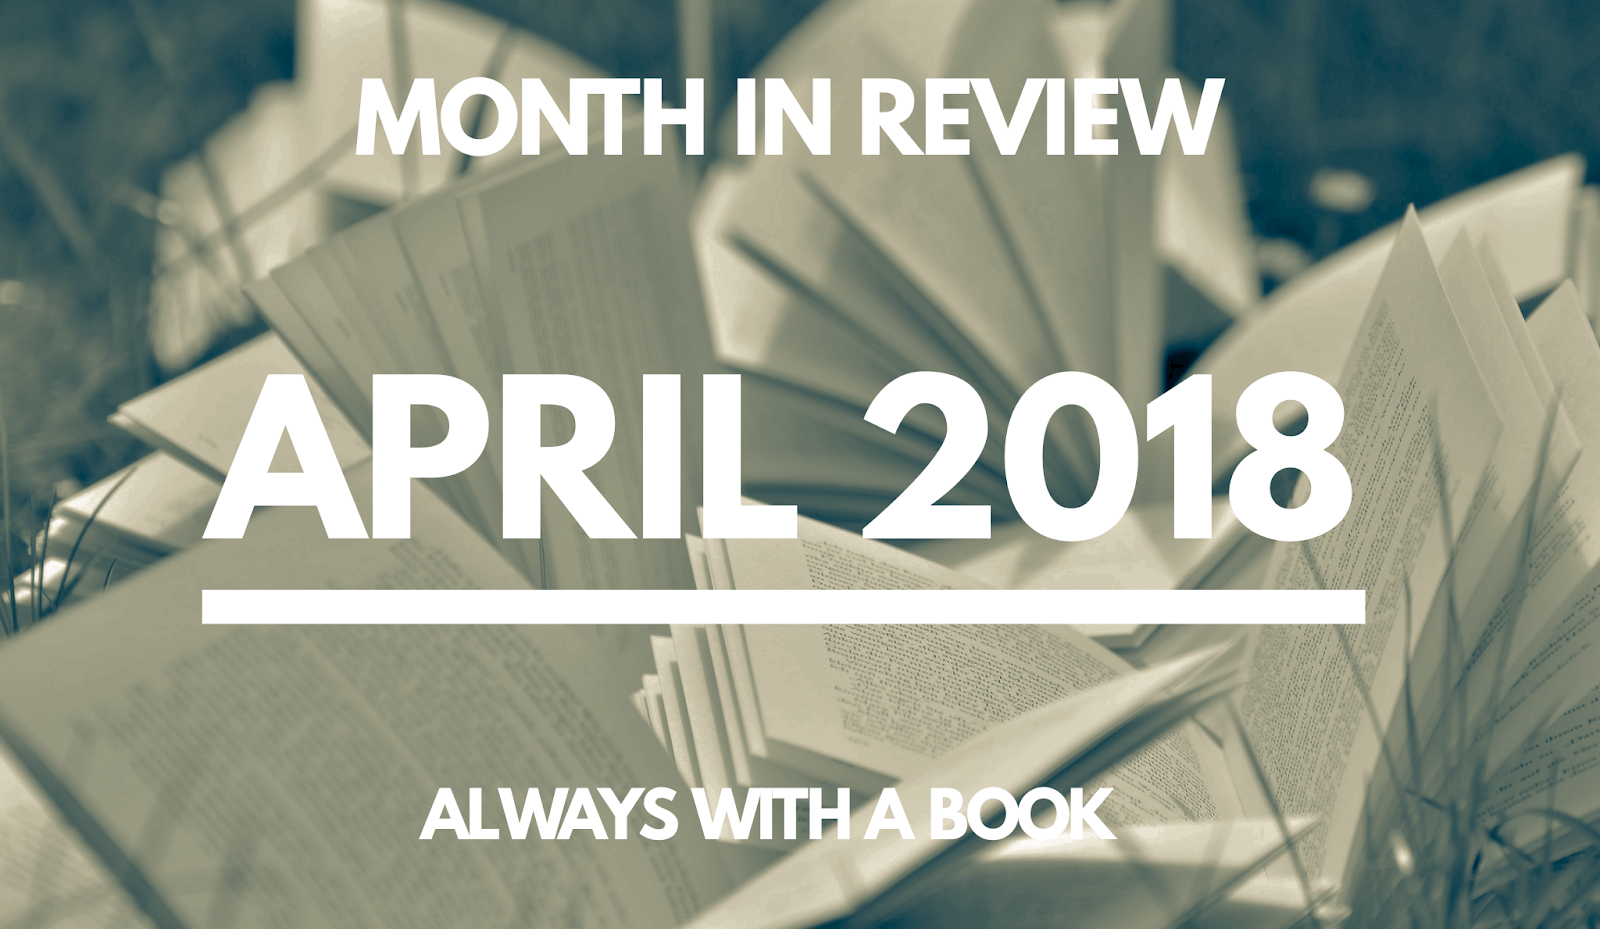 Month in Review: April 2018